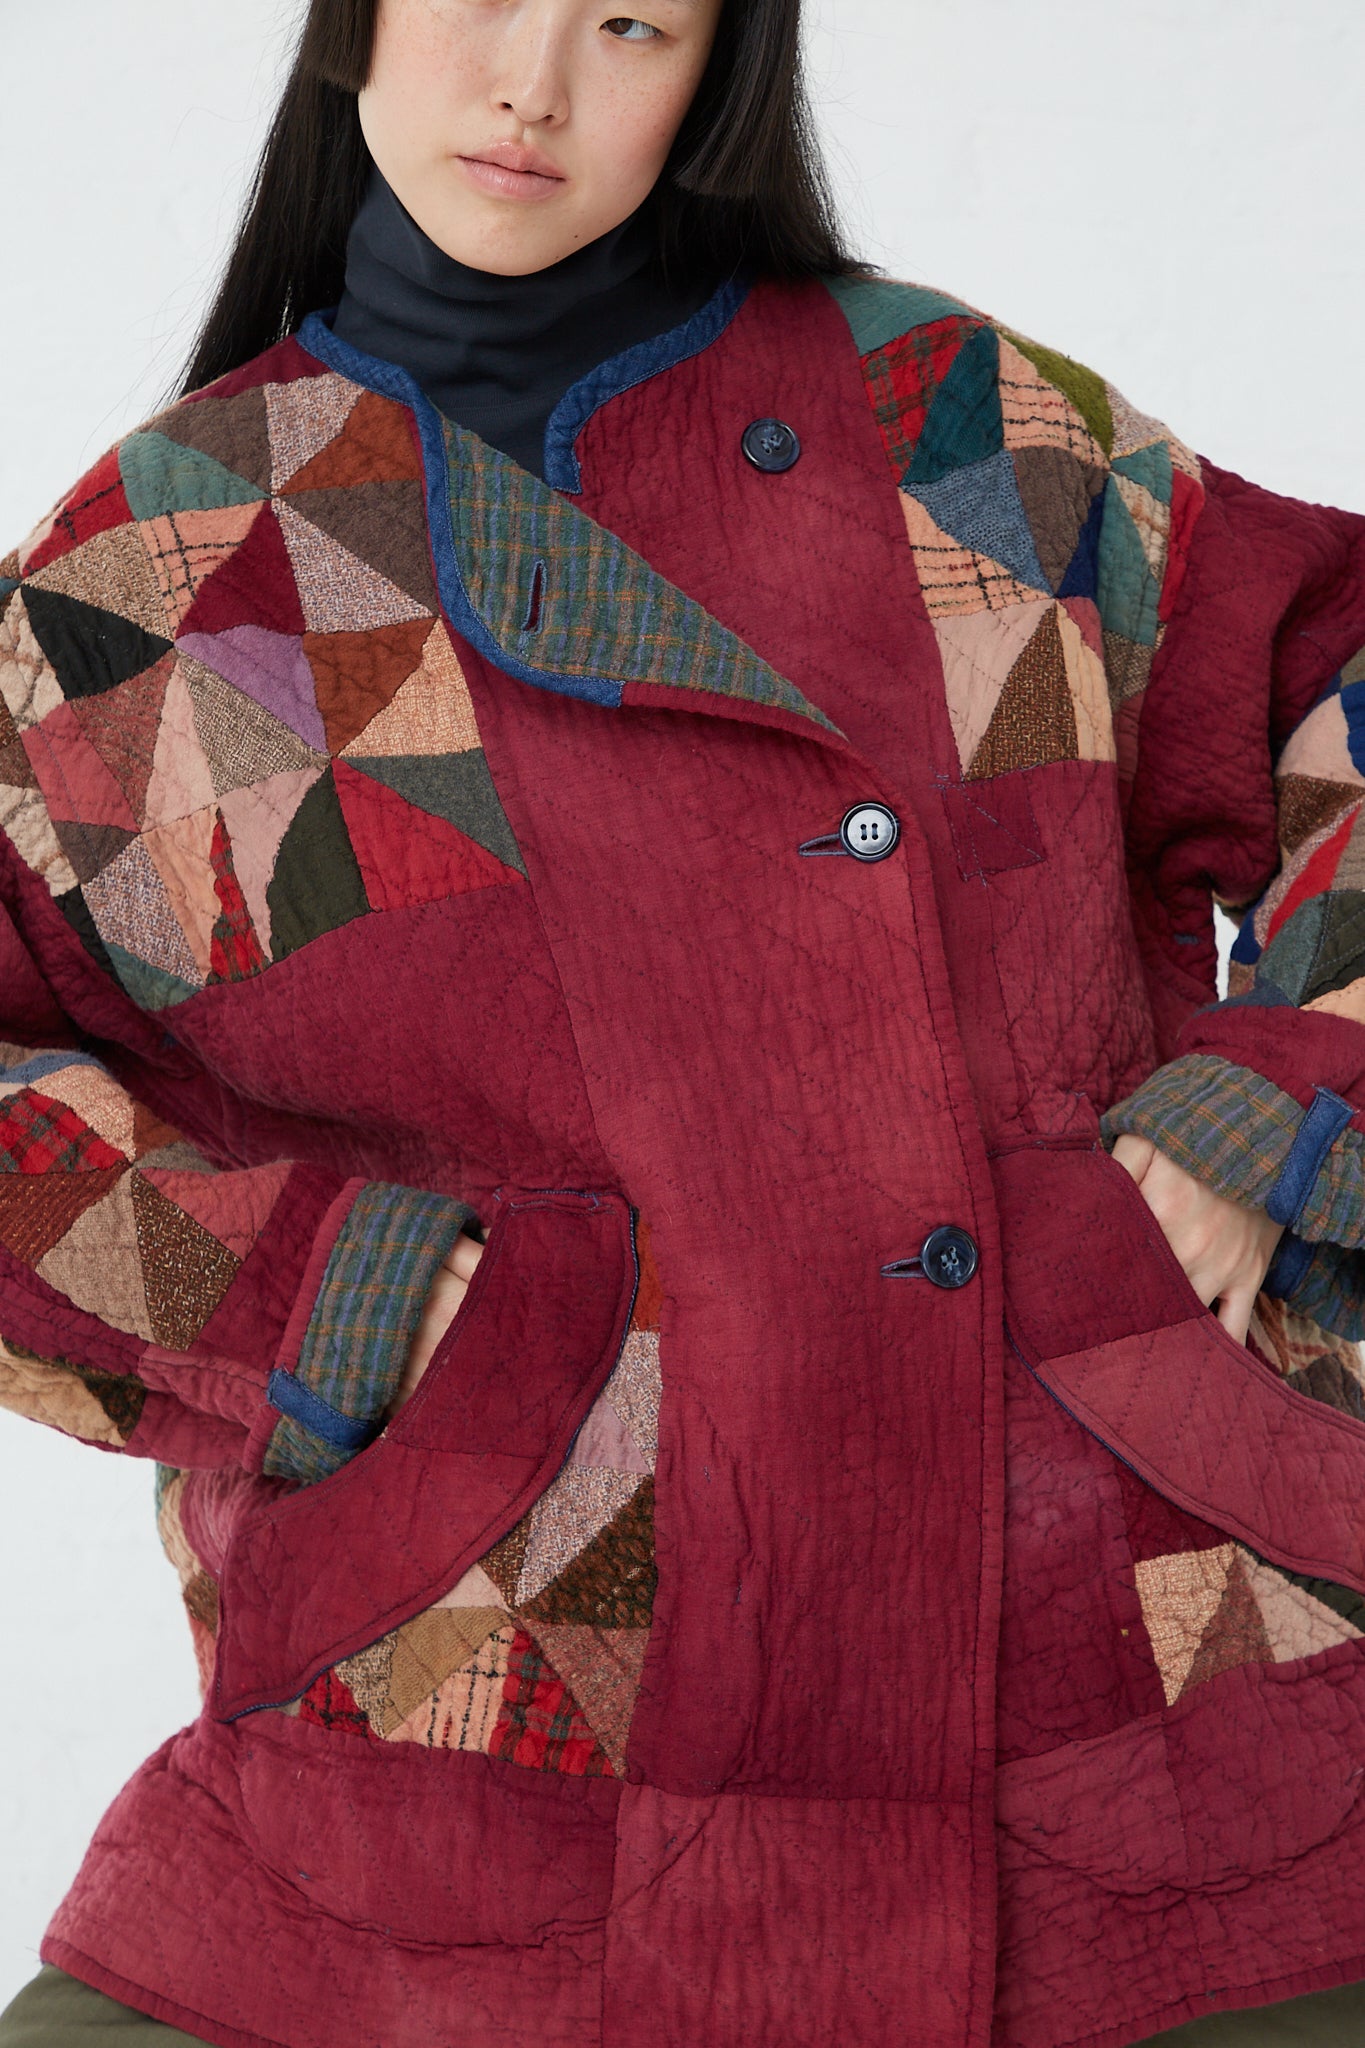 A woman wearing a As Ever Quilt Jacket in Mulberry.